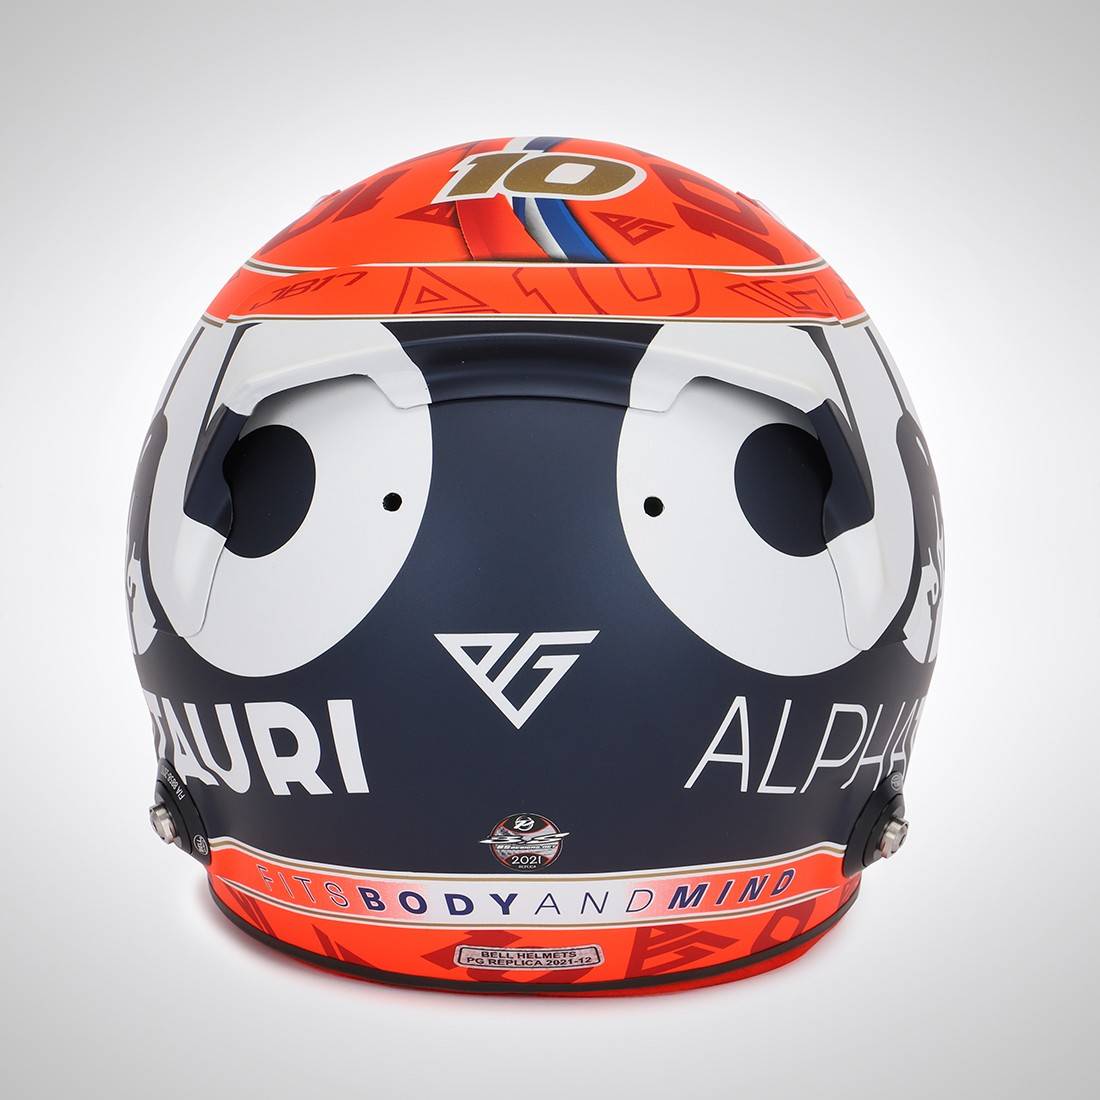 Pierre Gasly 2021 Signed 1:1 Scale Promo Helmet